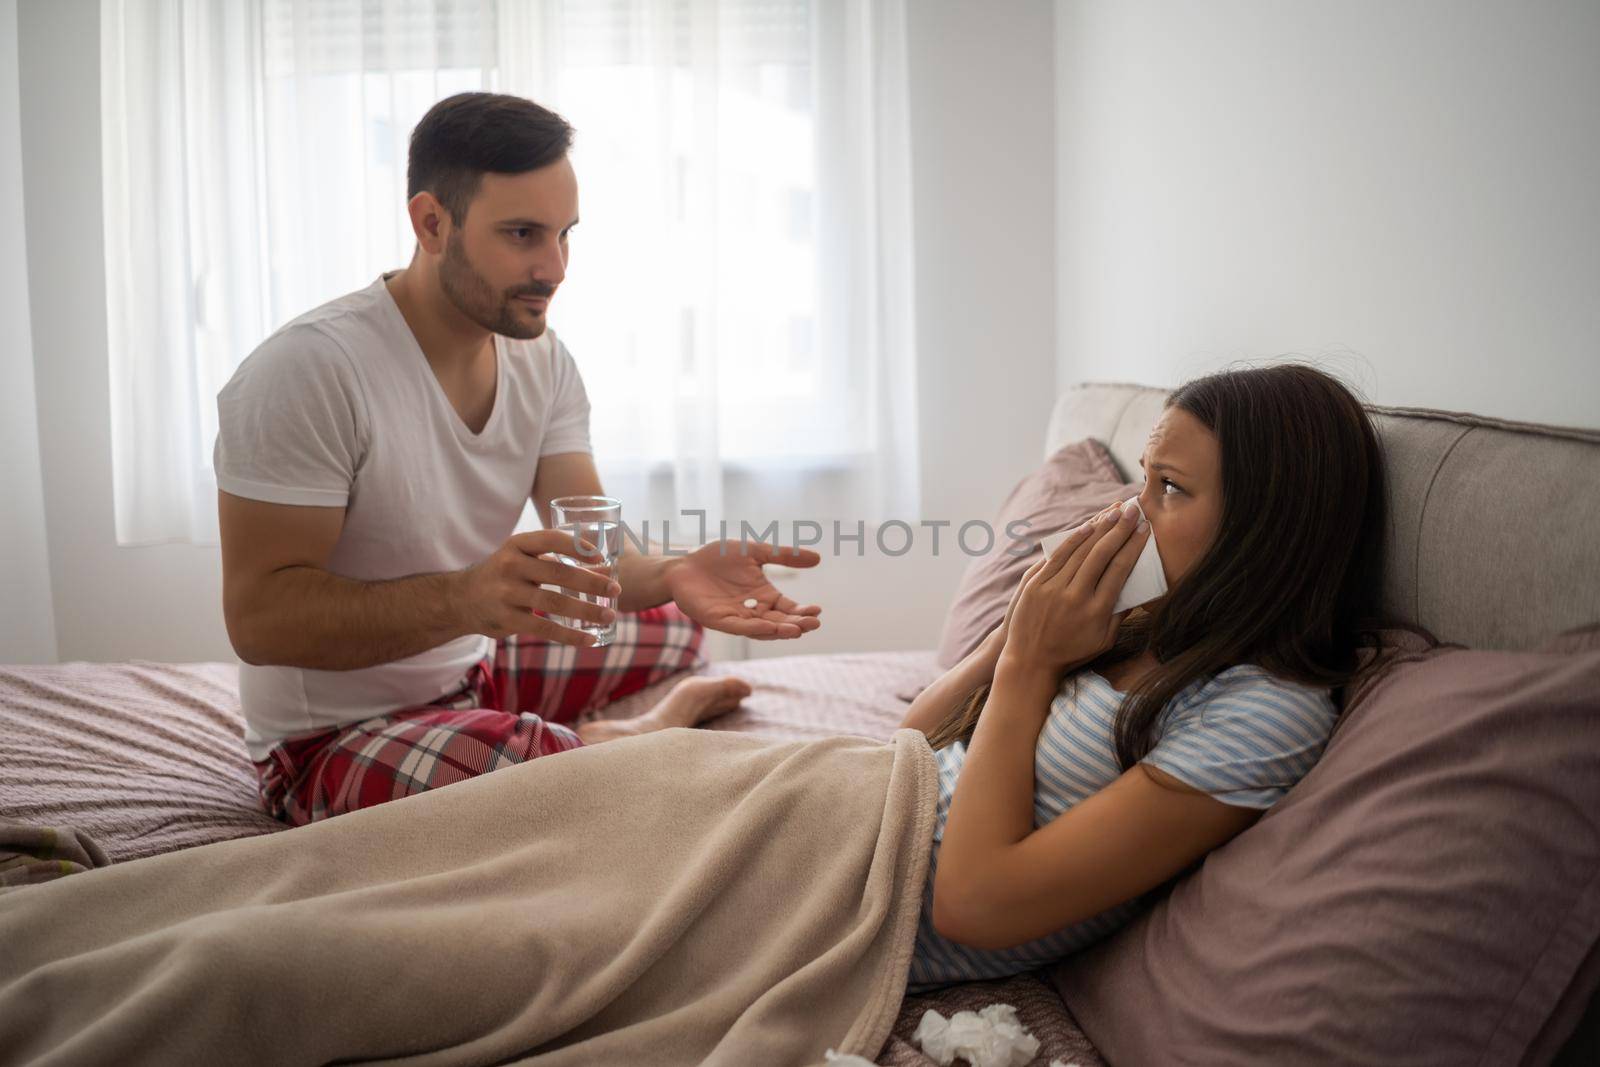 Woman is sick, man is giving her pills.